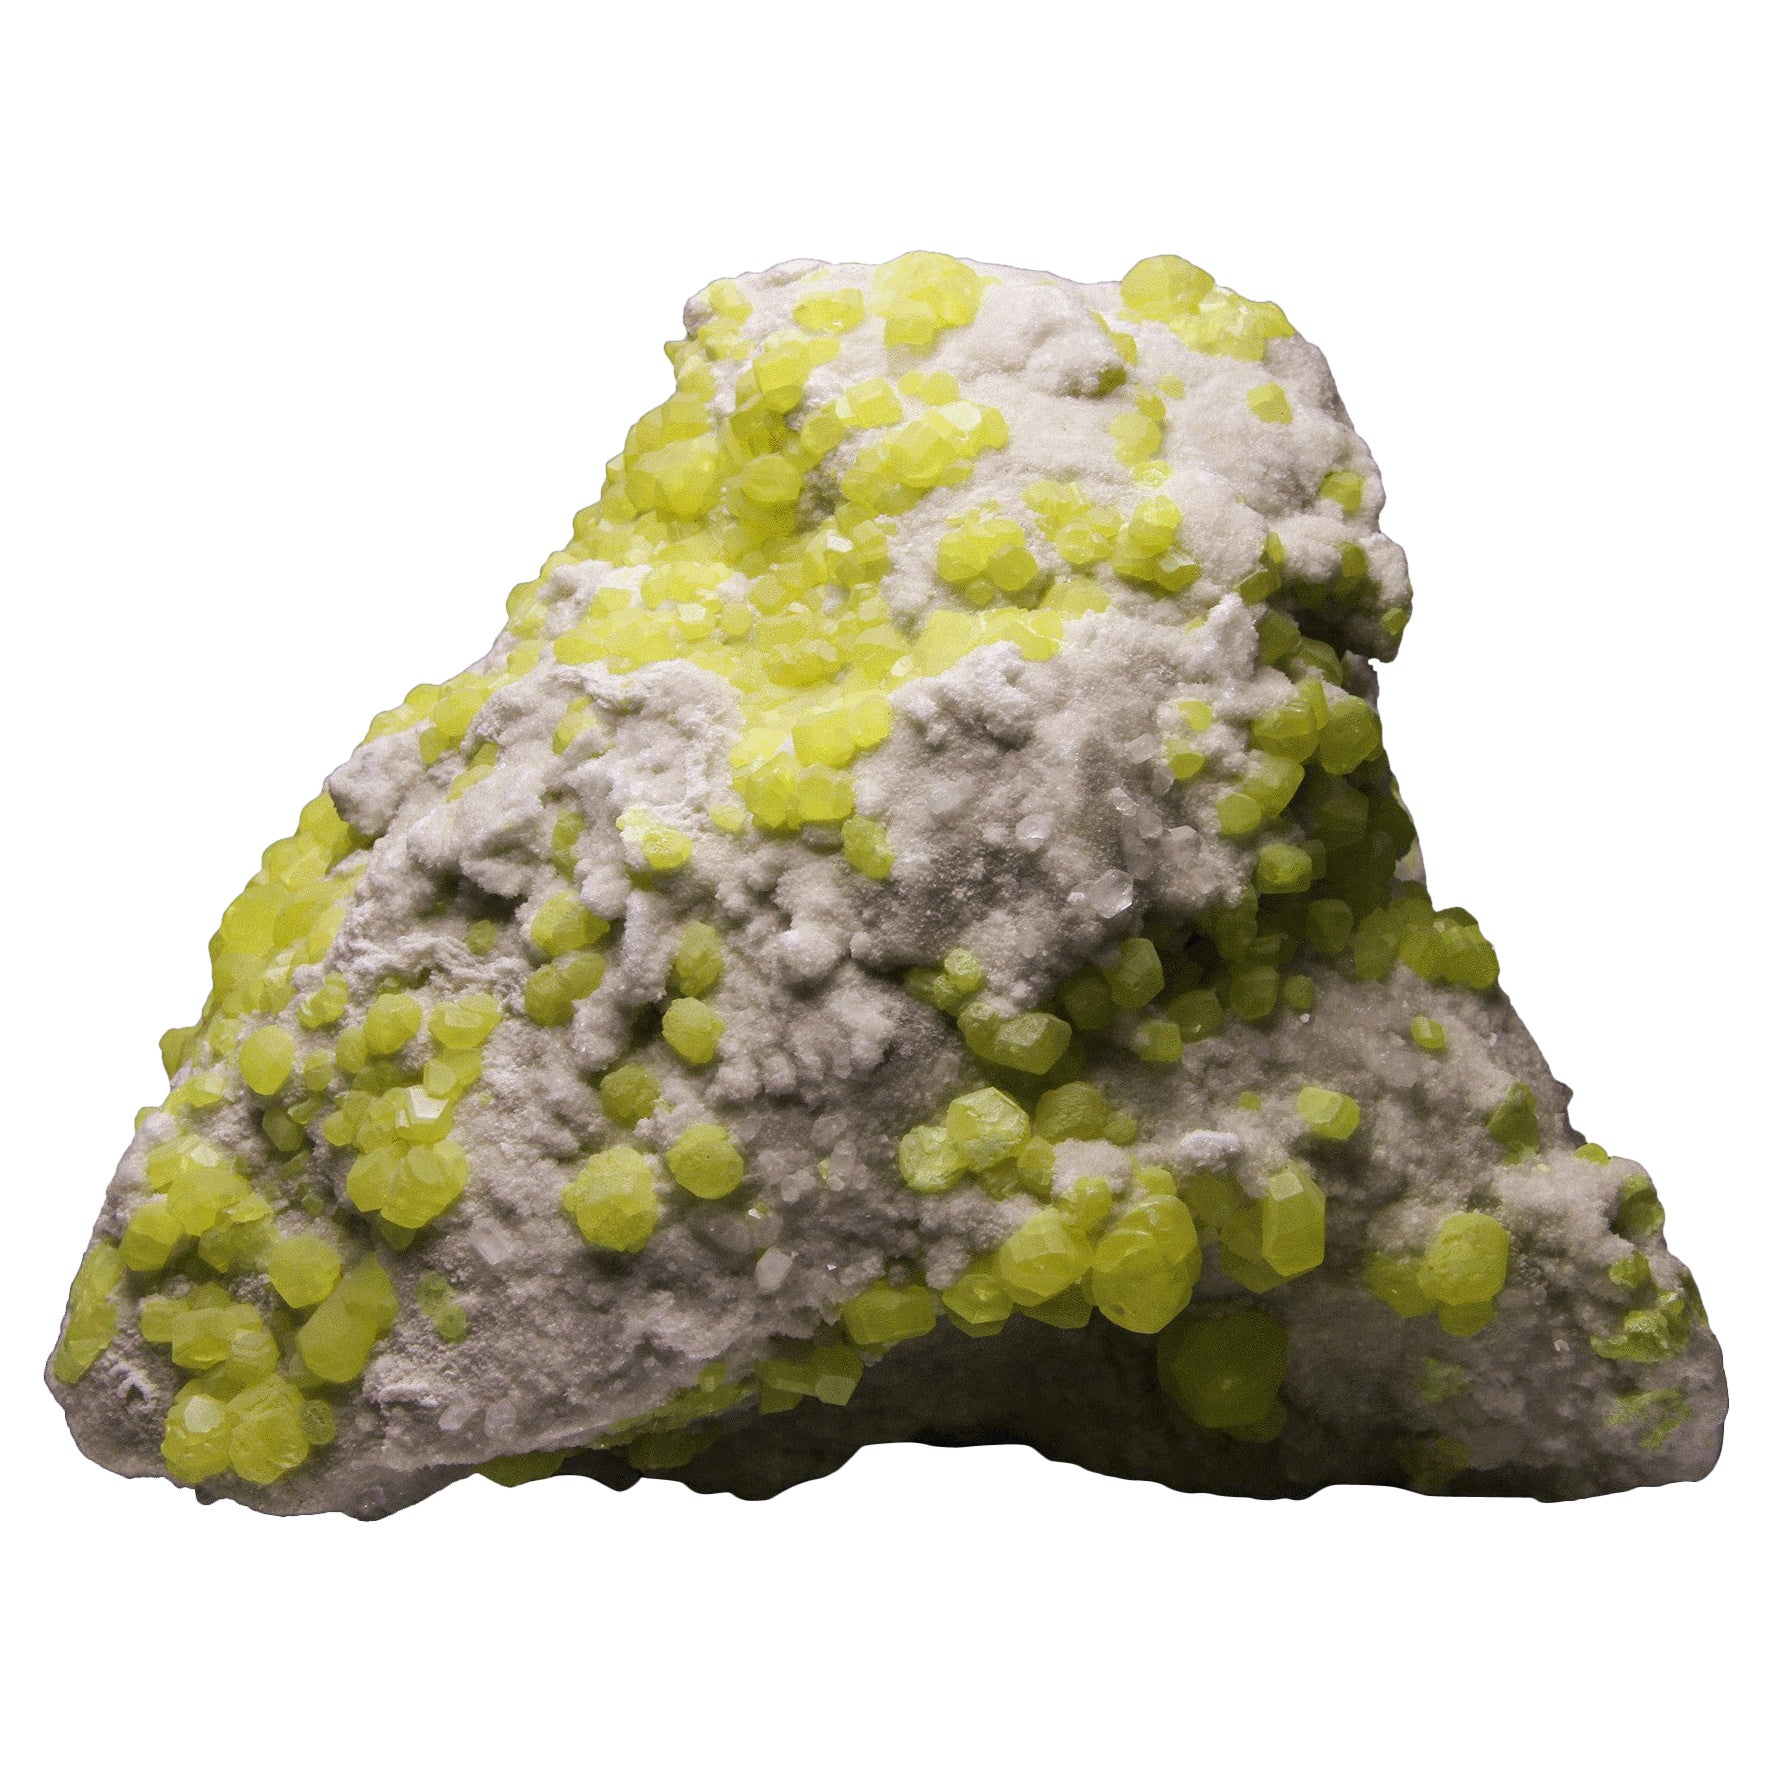 Sulfur on Aragonite from Agrigento, Sicily, Italy